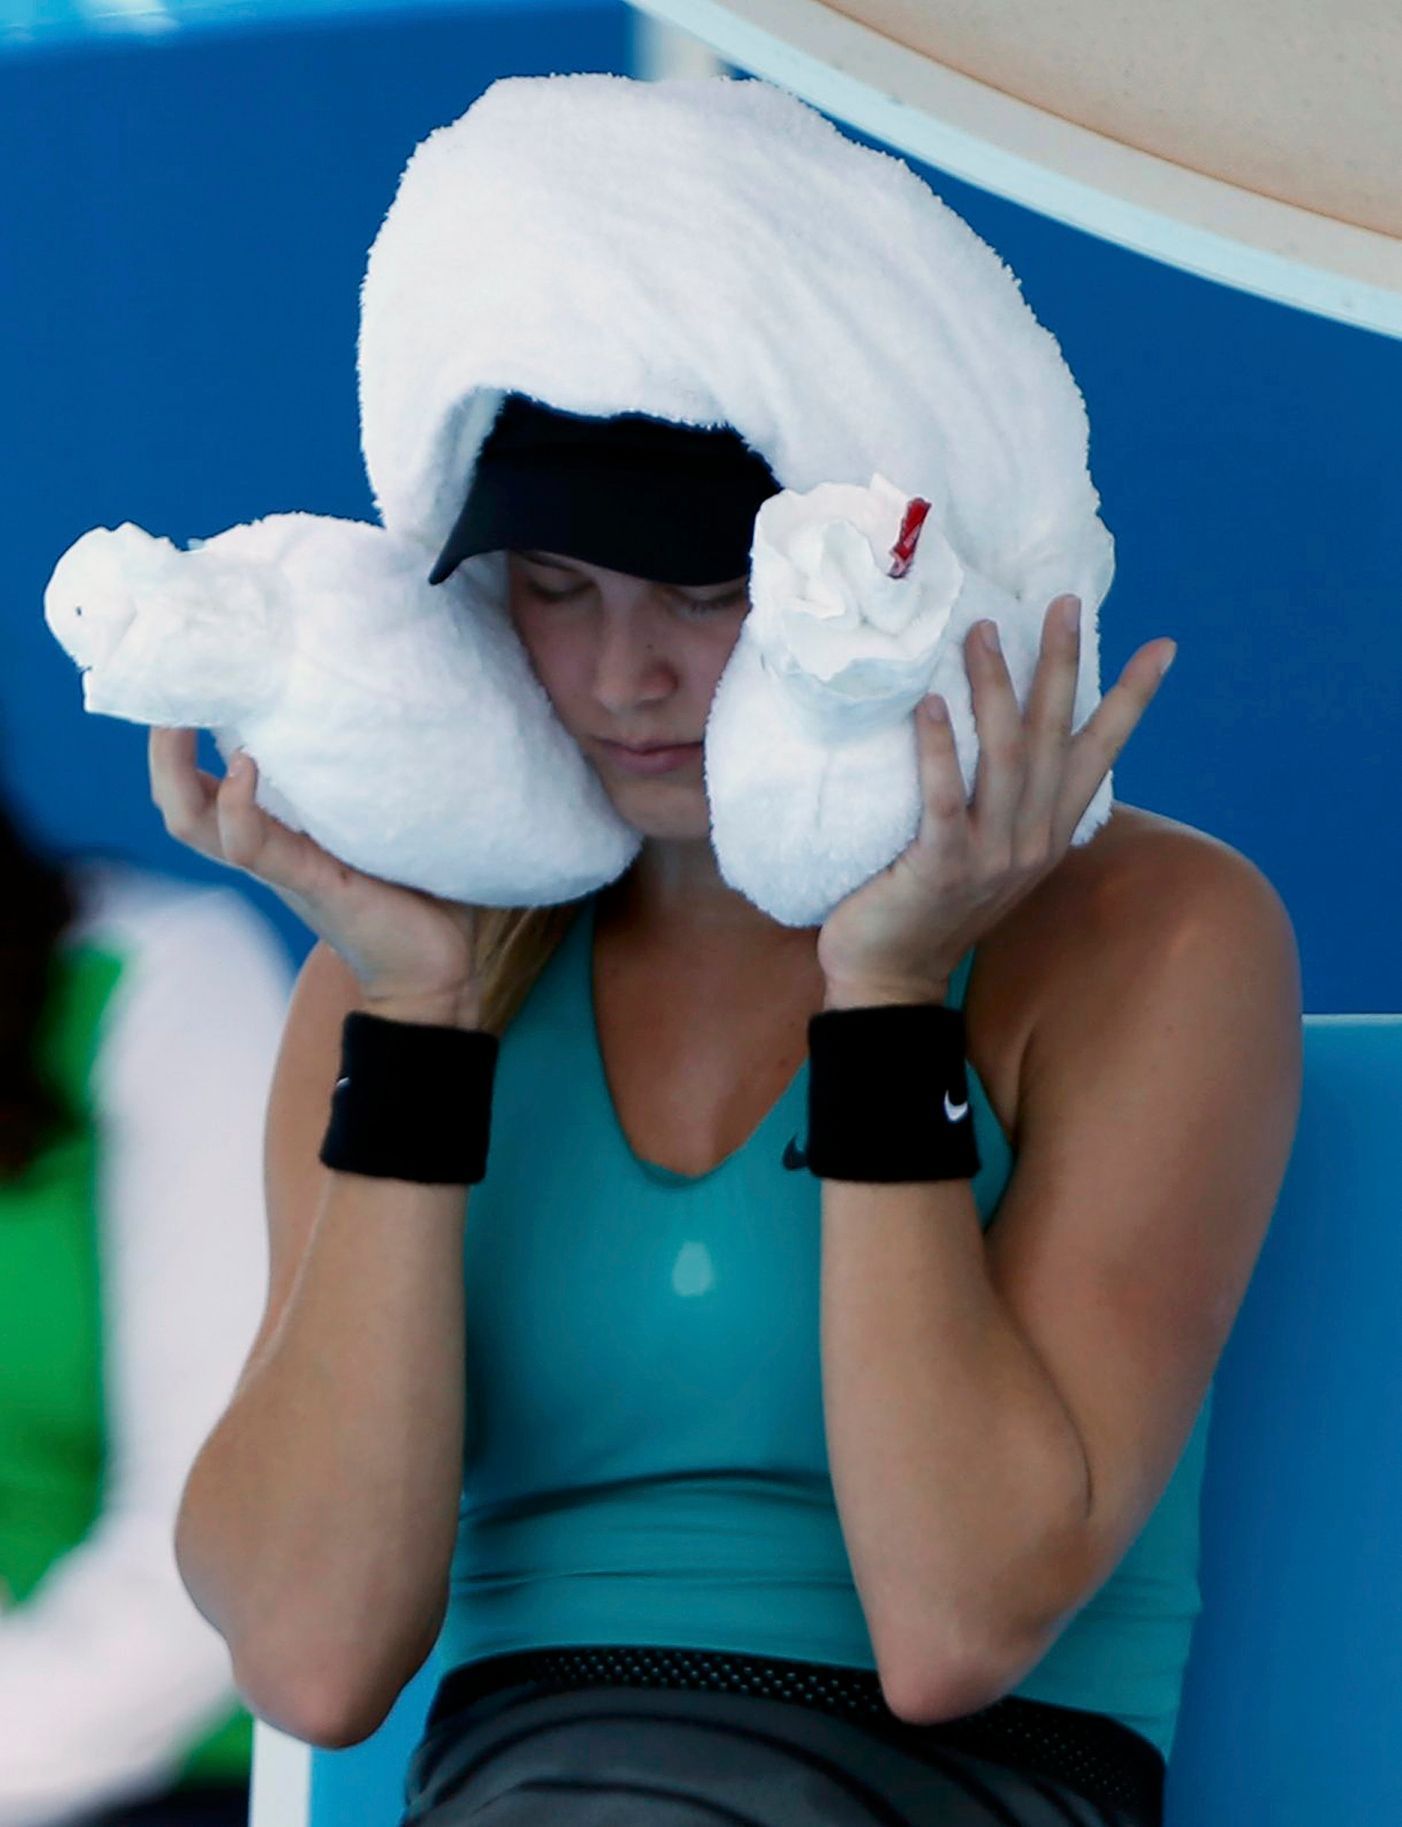 Eugenie Bouchard of Canada sits with an ice-packed towel over her head during a break in play in her women's singles match against Lauren Davis of the U.S. at the Australian Open 2014 tennis tournamen